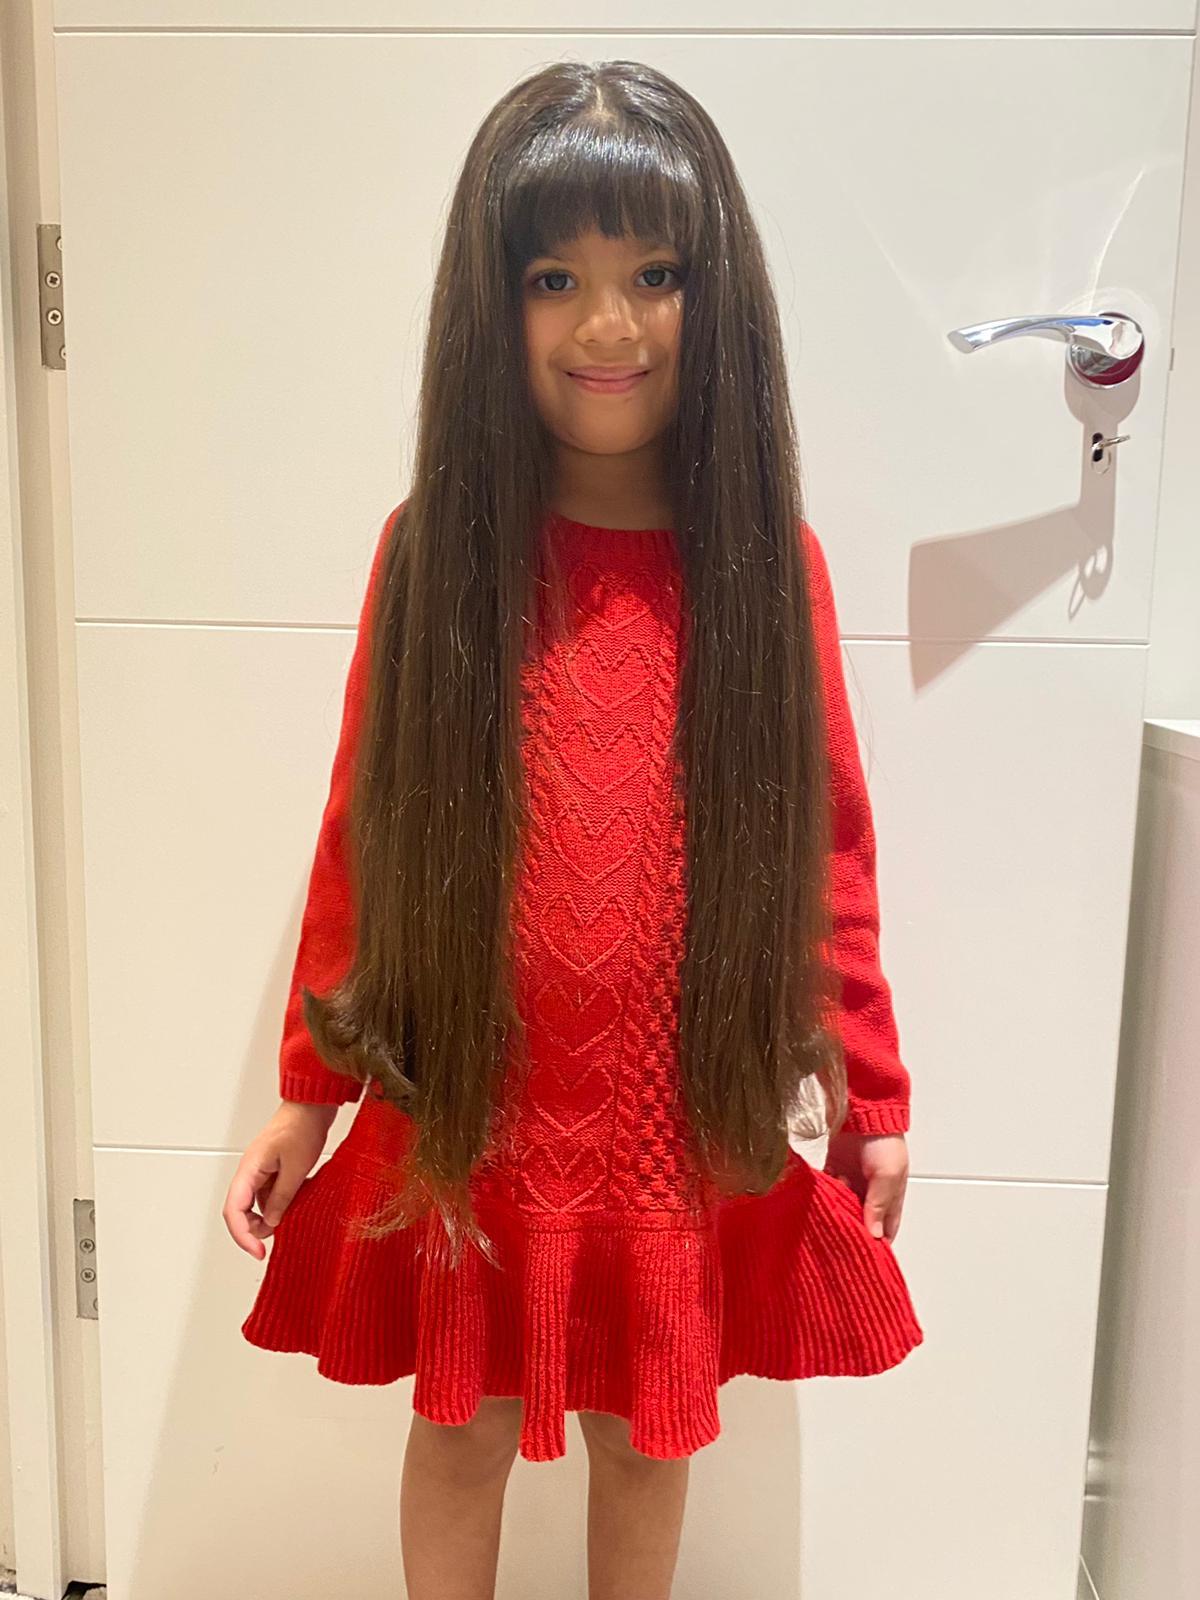 Nikki had never had a proper haircut in her life and her hair had grown to 71cm. Credit: Tina Nandha